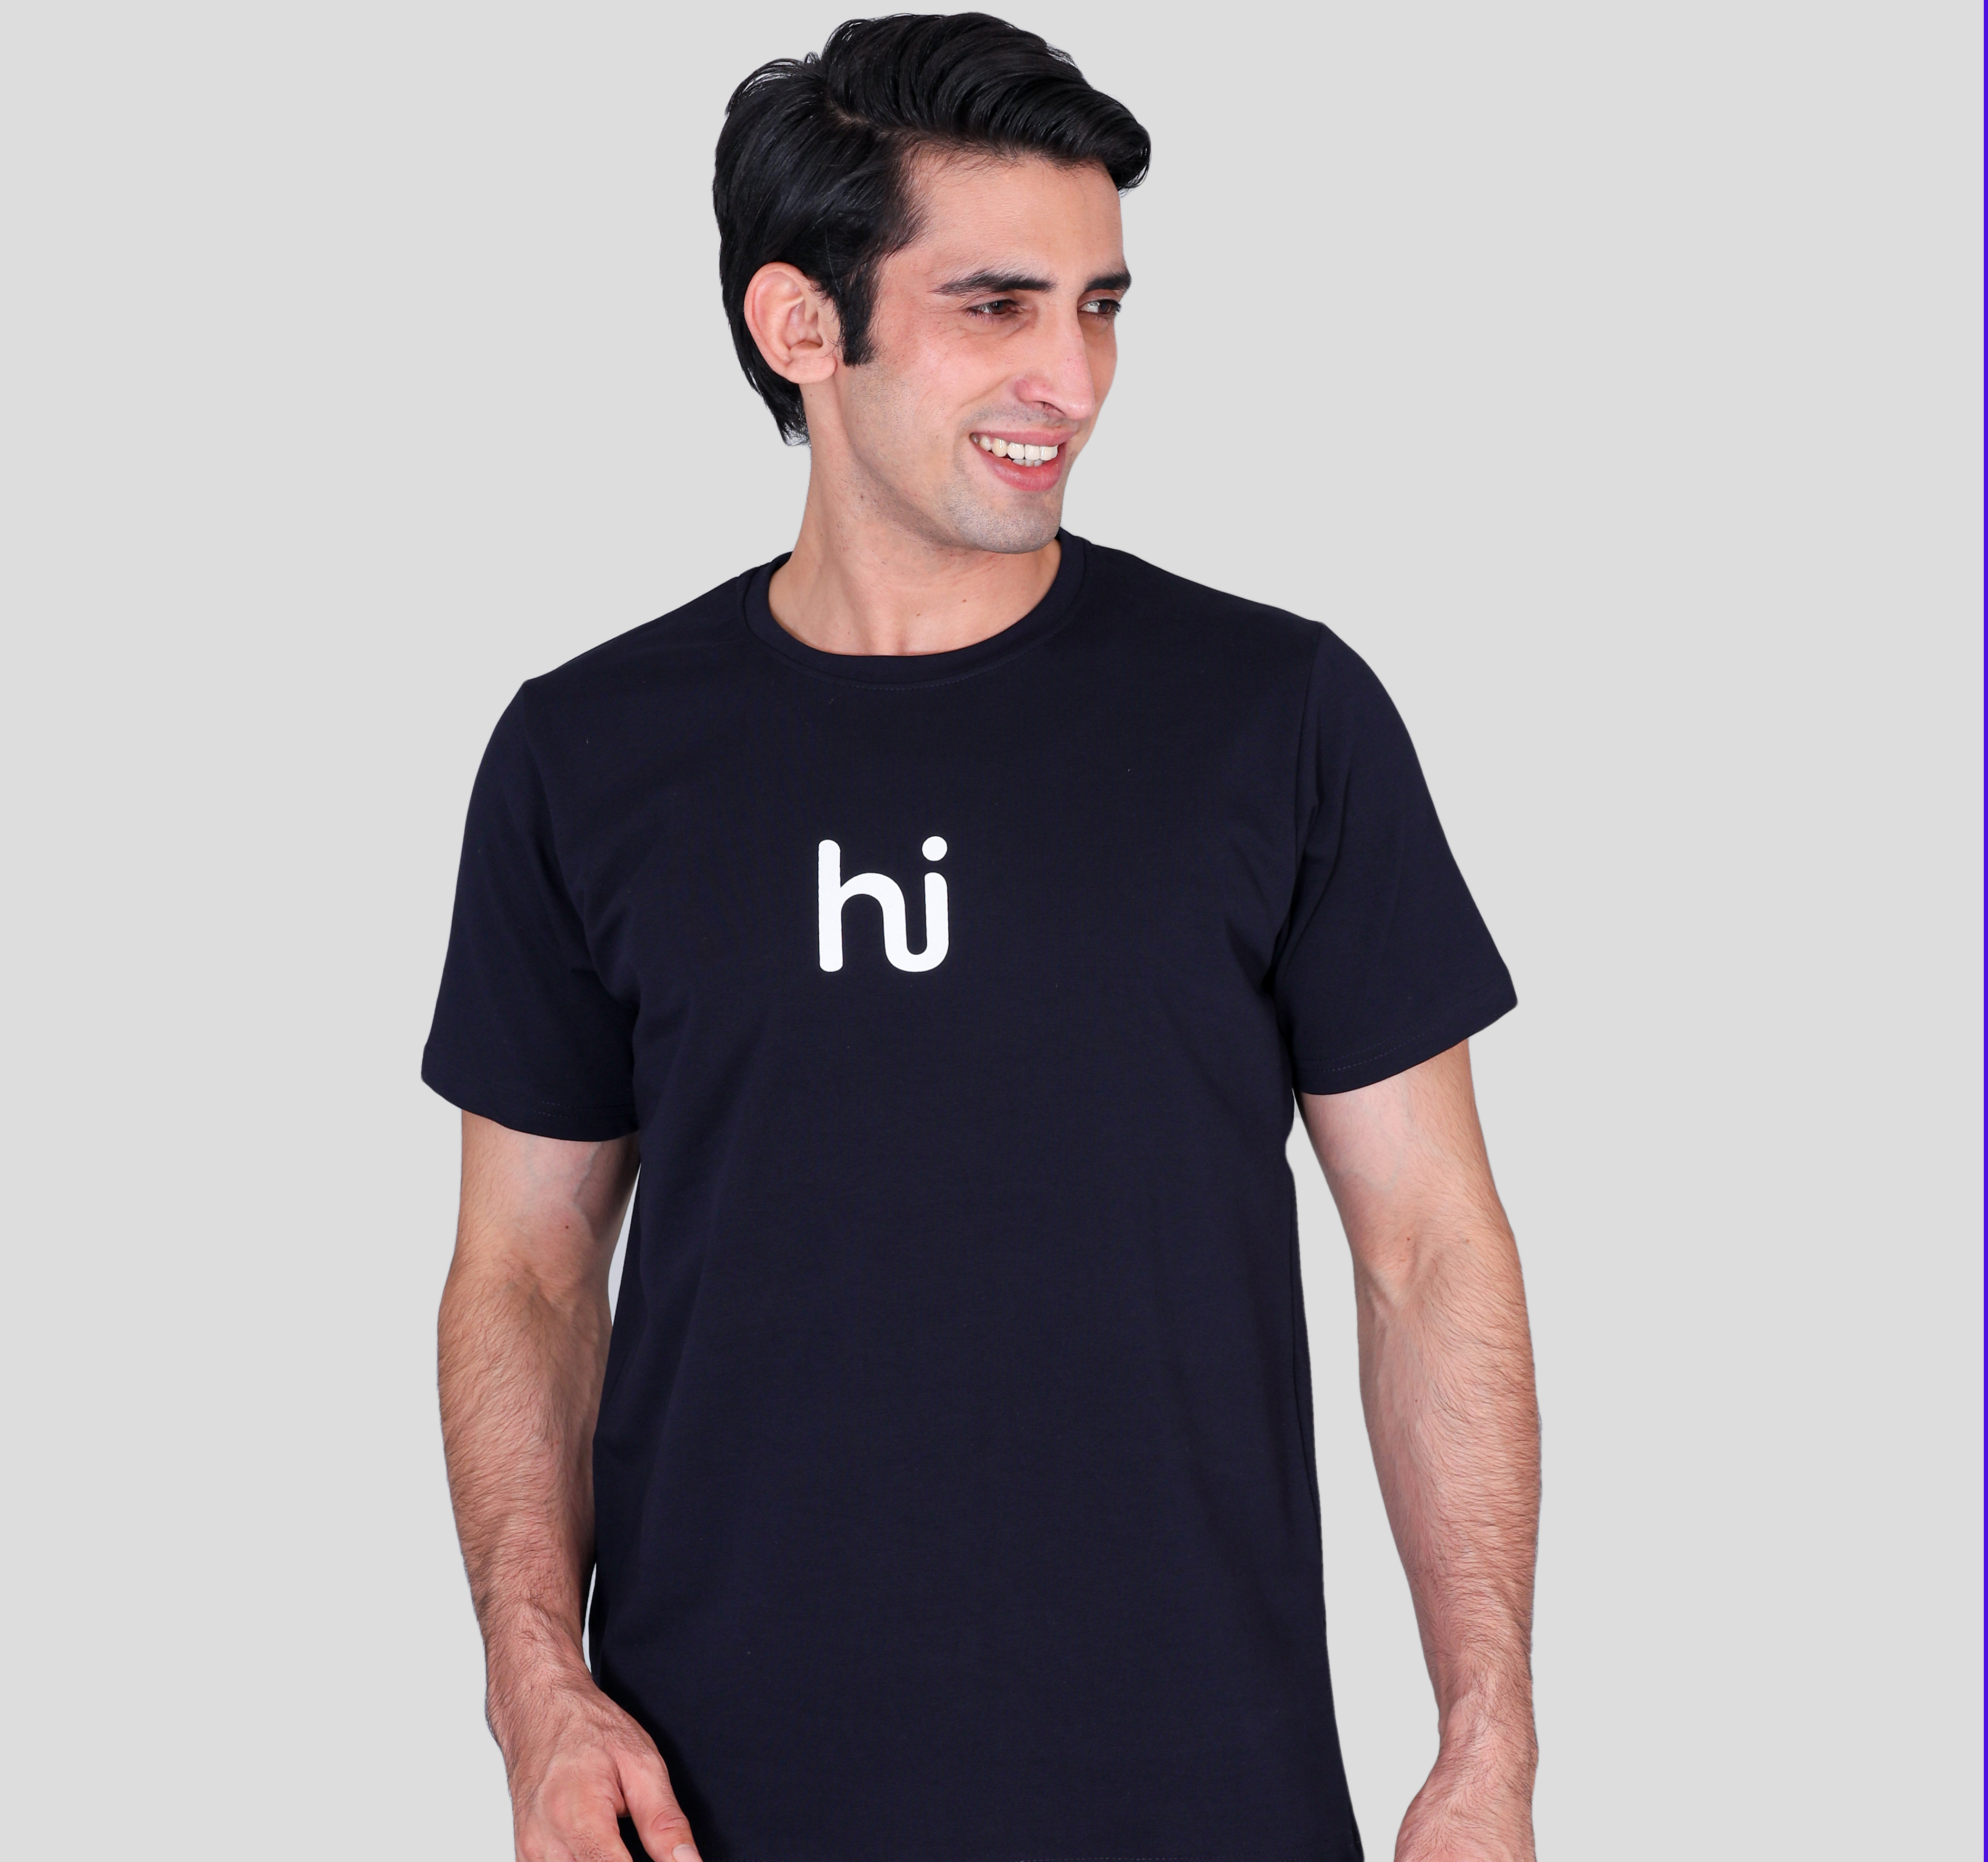 Navy blue single jersey tee promotional round neck t-shirts